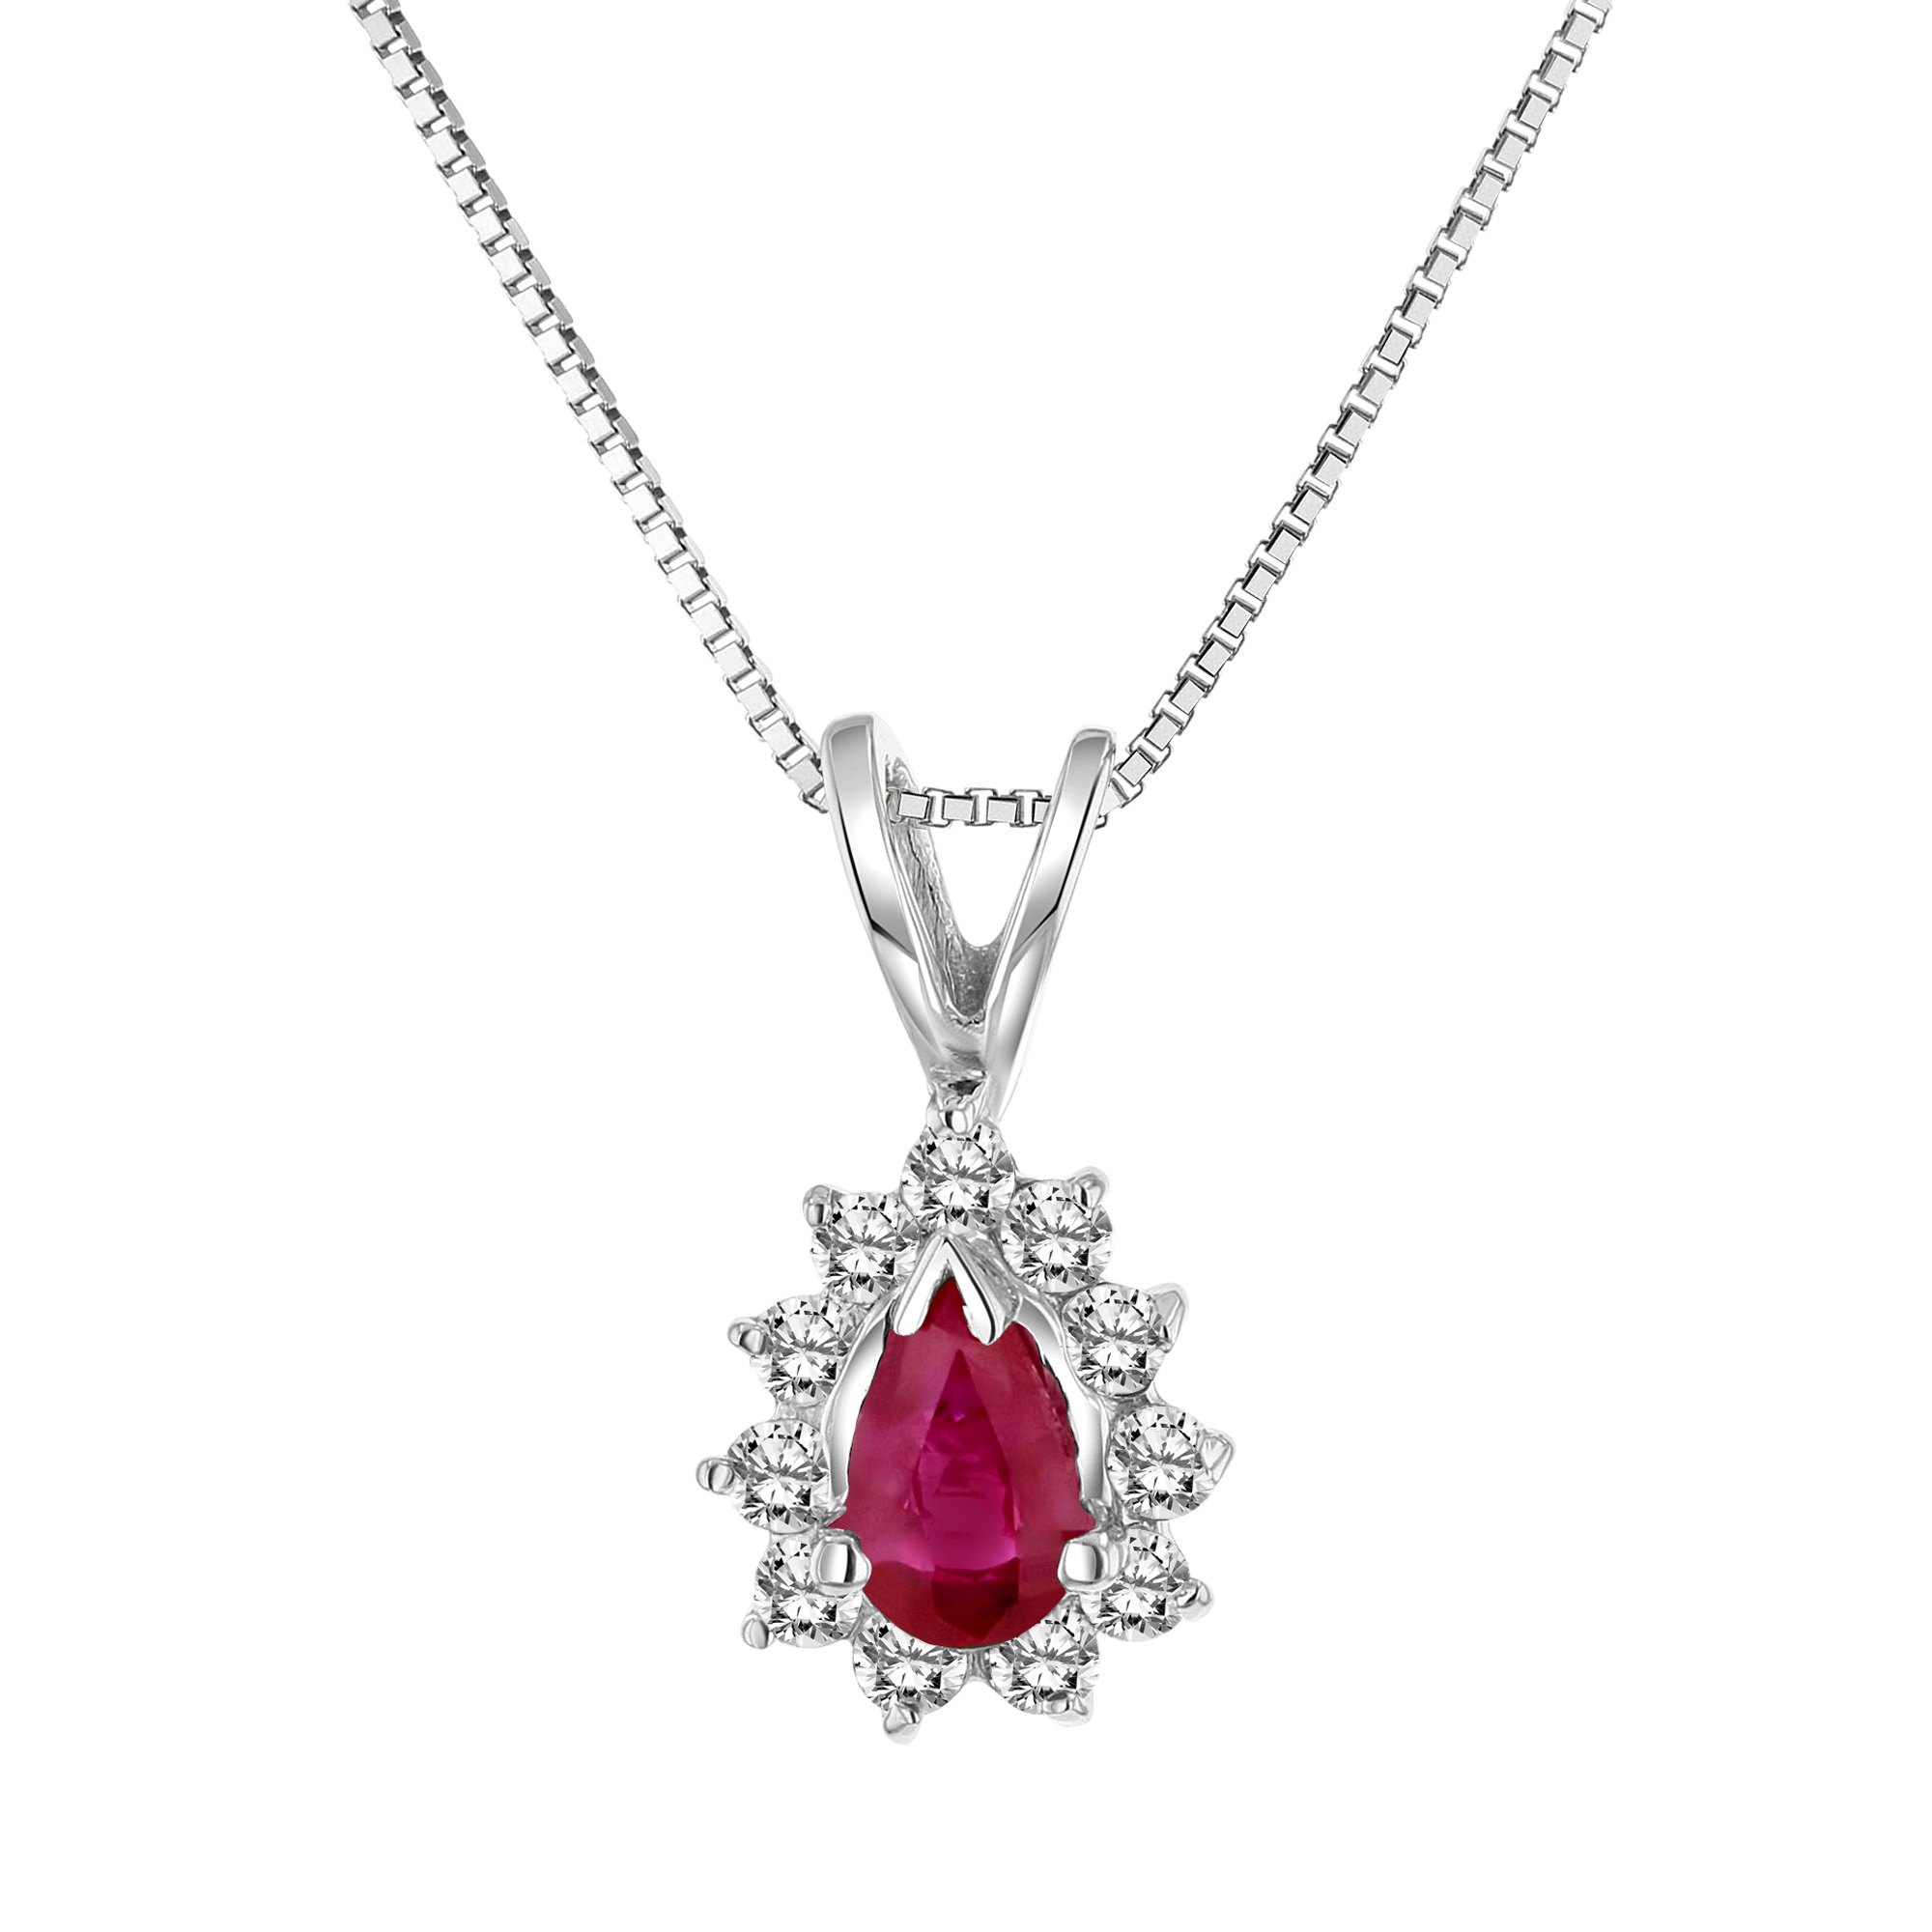 View 0.35cttw Diamond and Natural Heated Ruby Pendant in 14k Gold 